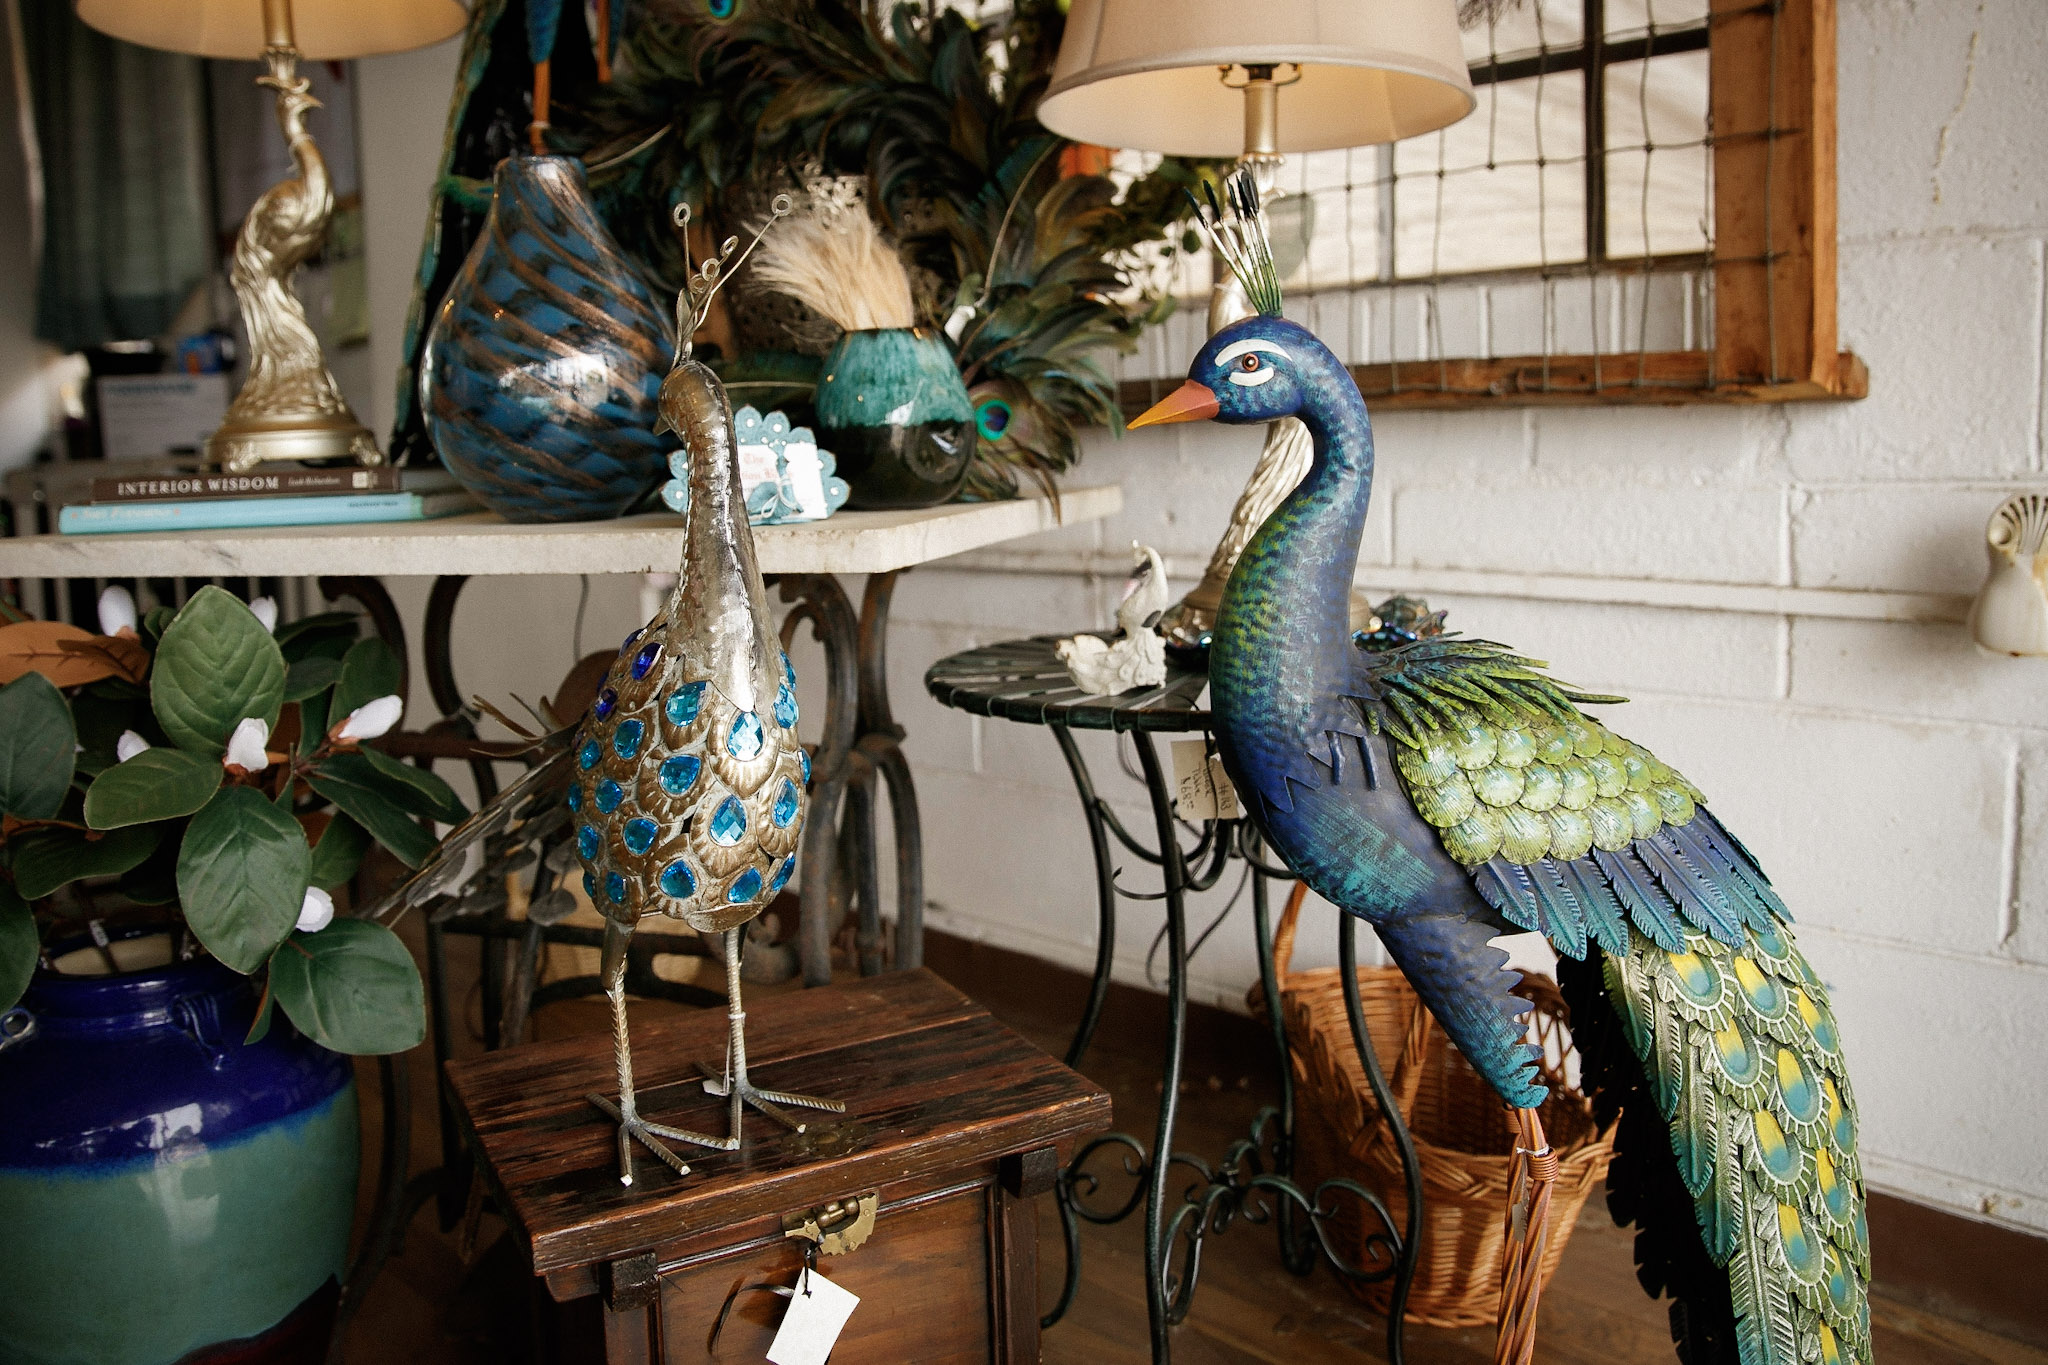 peacock statues